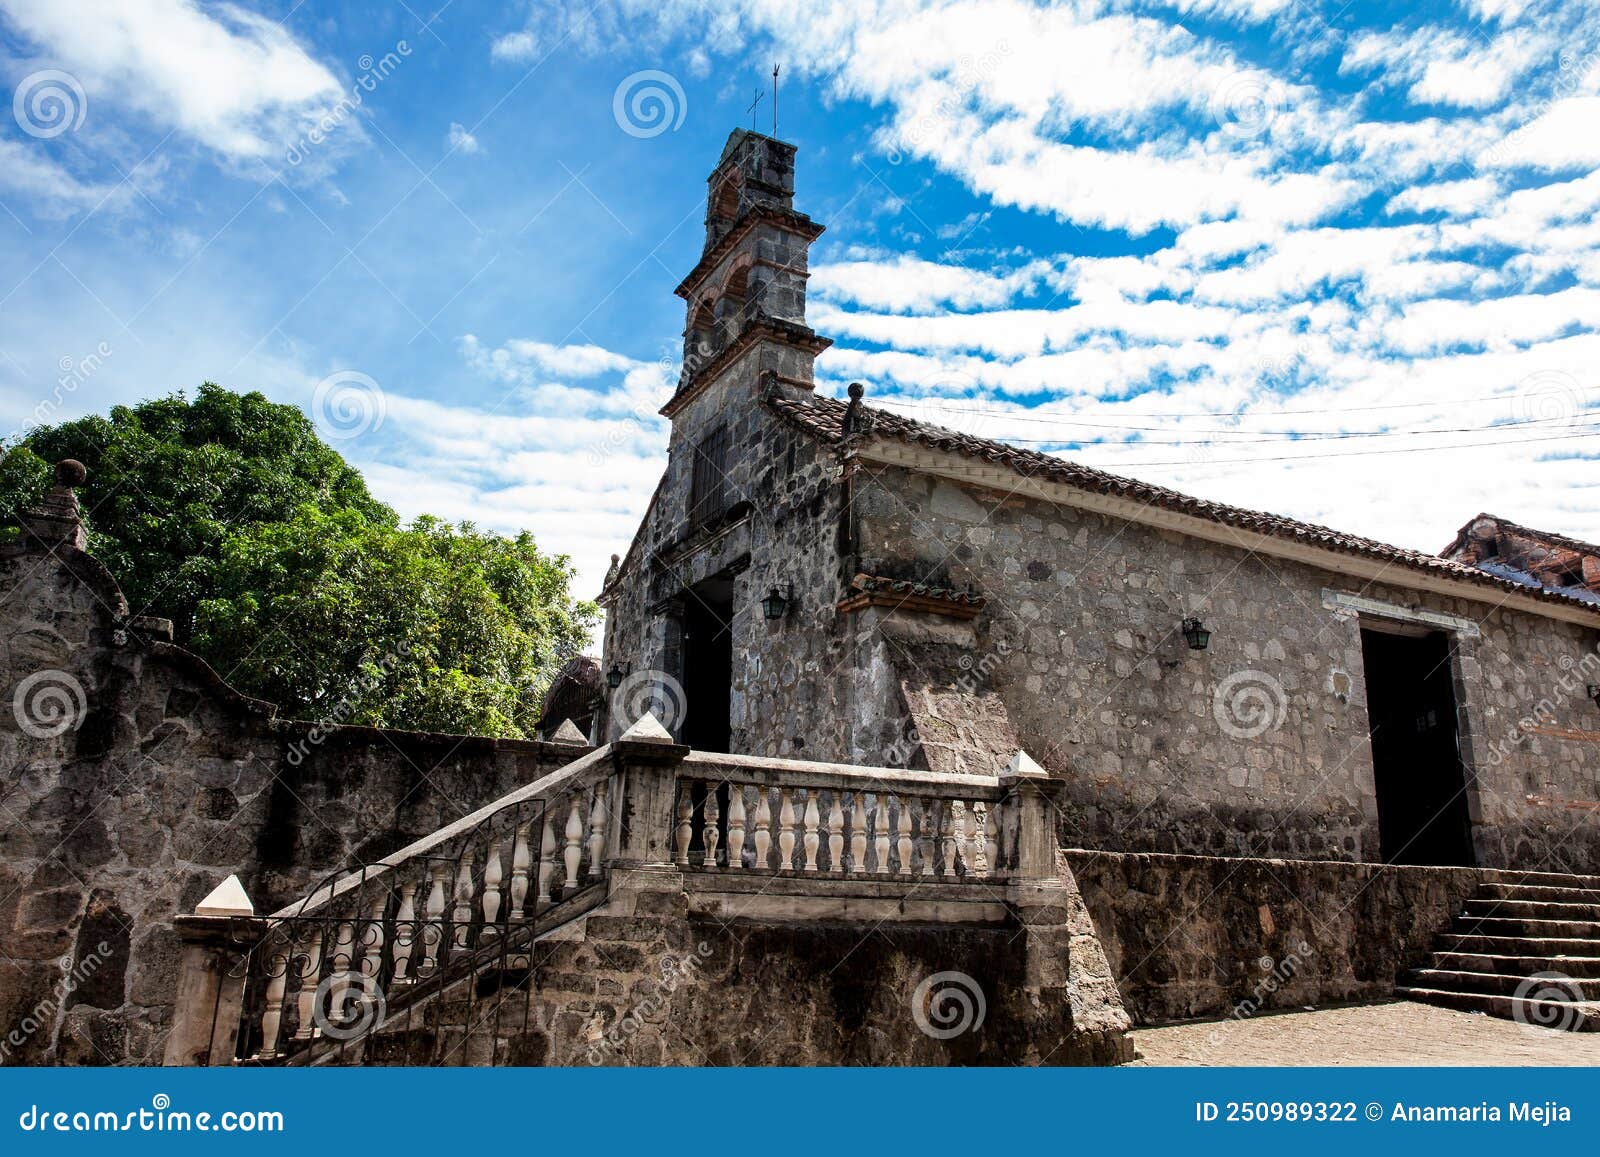 the beautiful historical church la ermita built in the sixteenth century in the town of mariquita in colombia